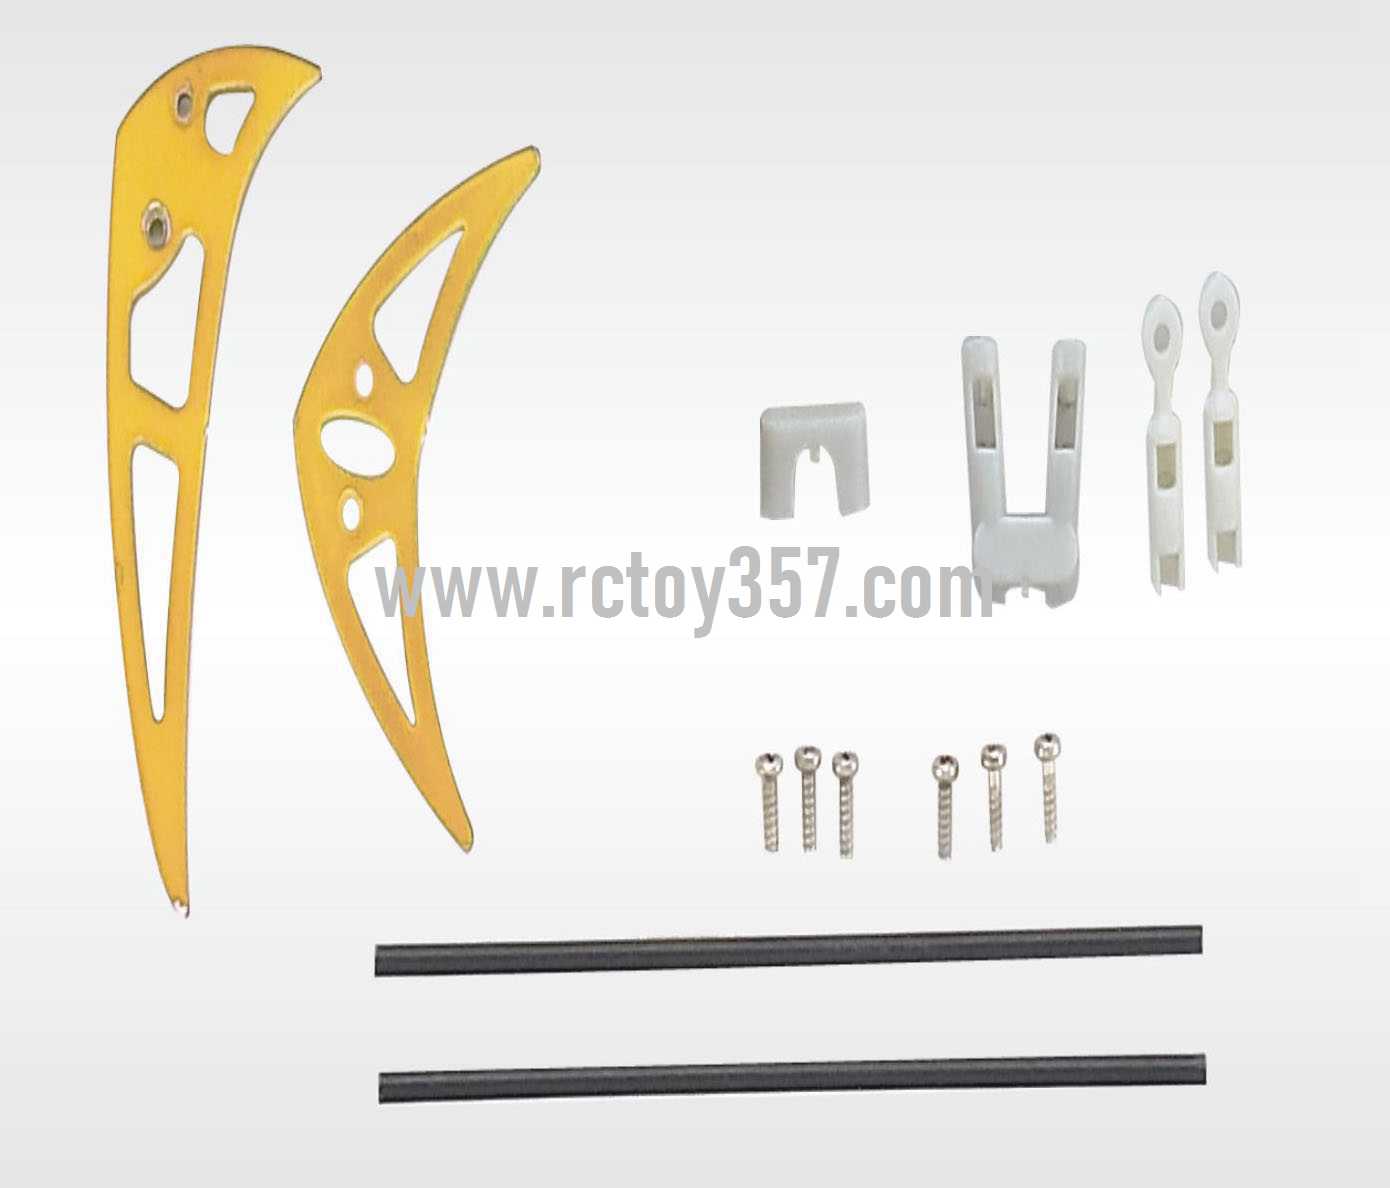 RCToy357.com - Shuang Ma/Double Hors 9103 toy Parts Balance stabilizer Decorative set(Yellow)